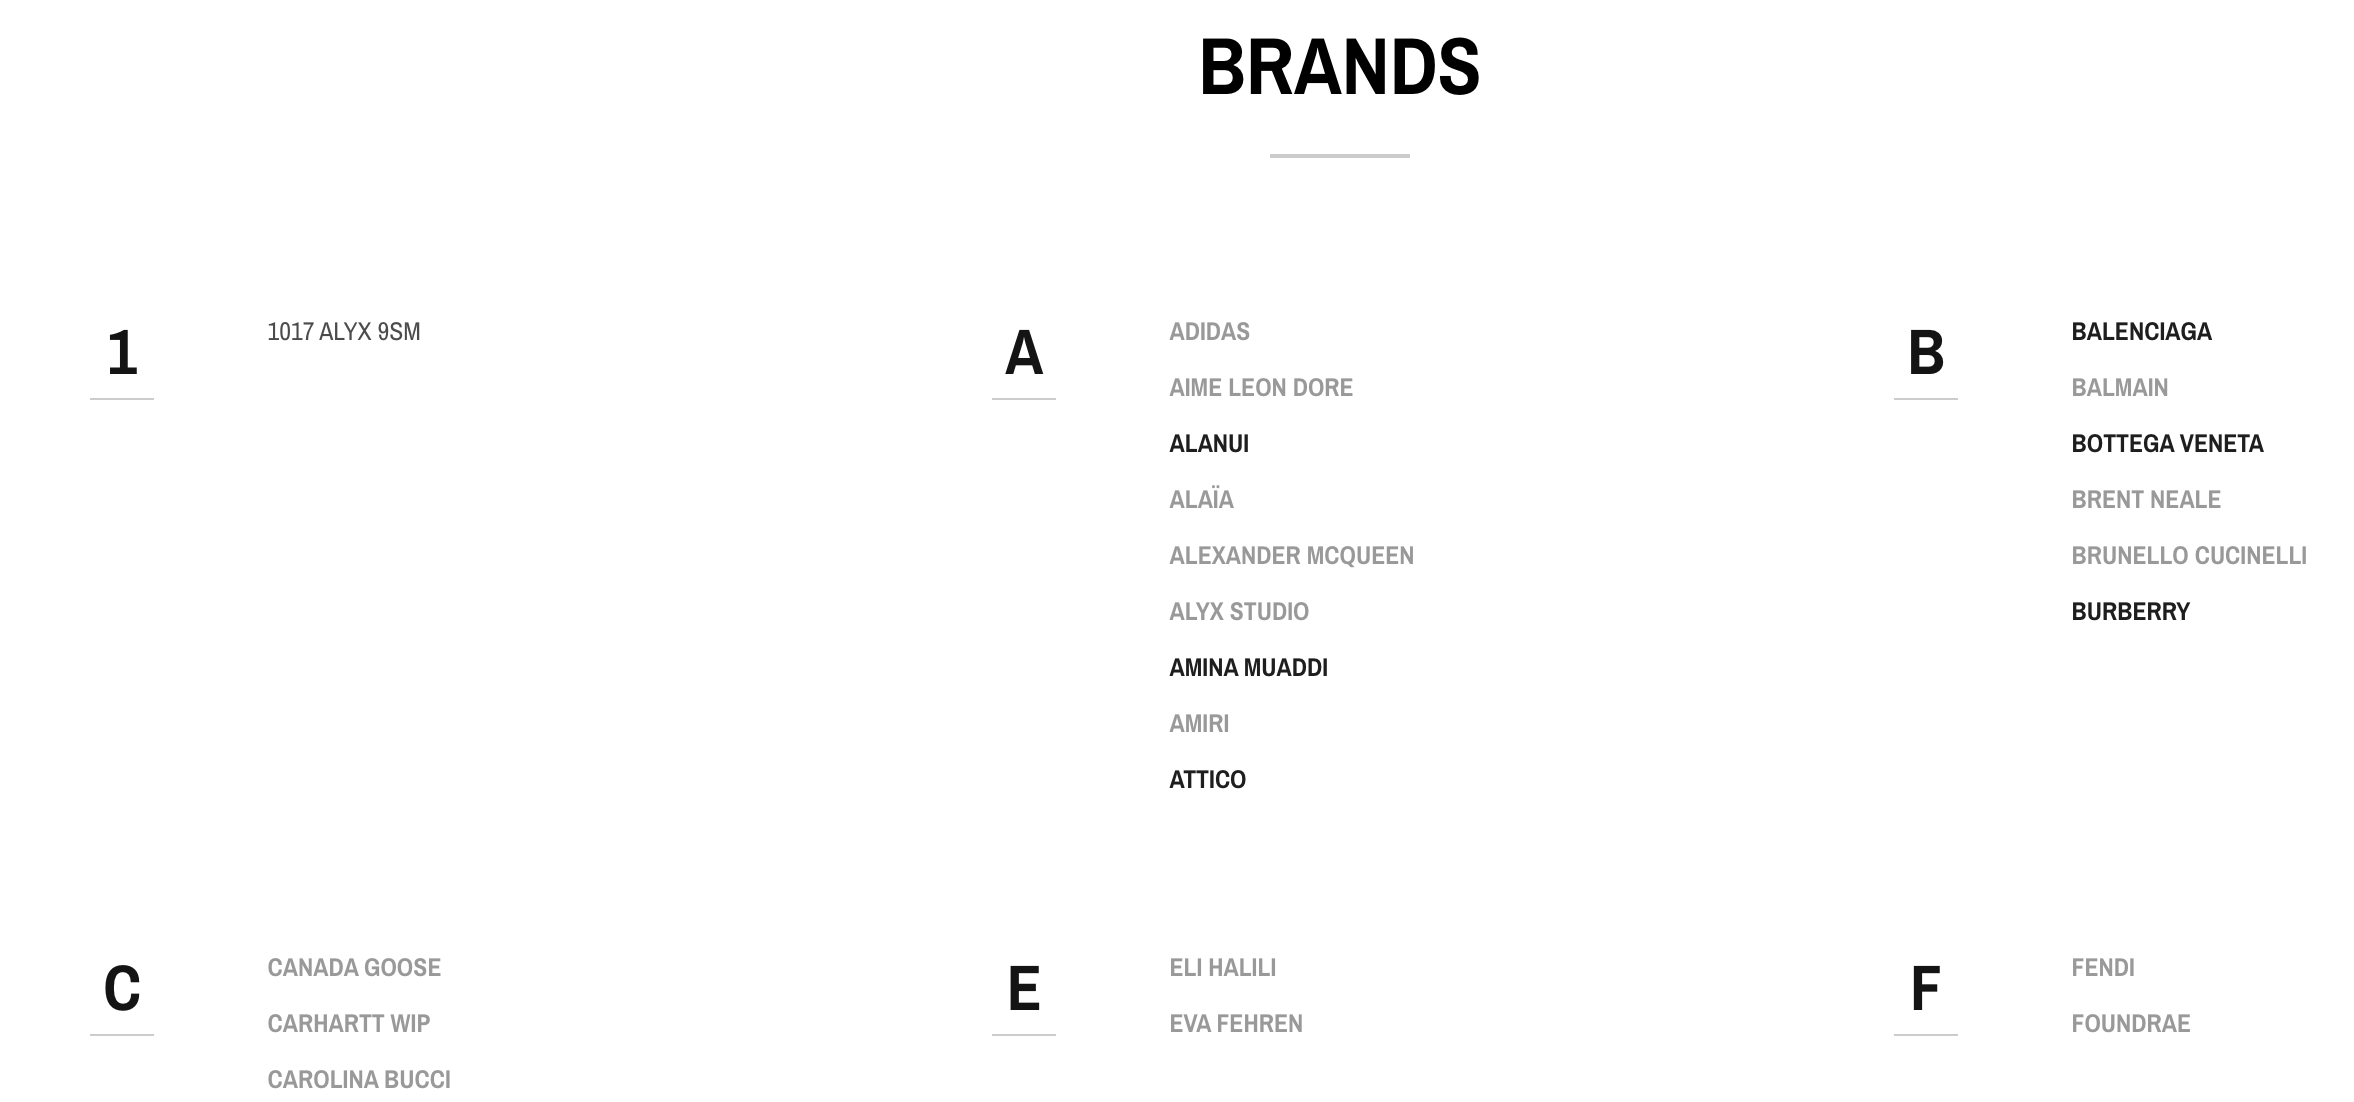 The ‘Brand’ page allows shoppers to find products by their favorite designers